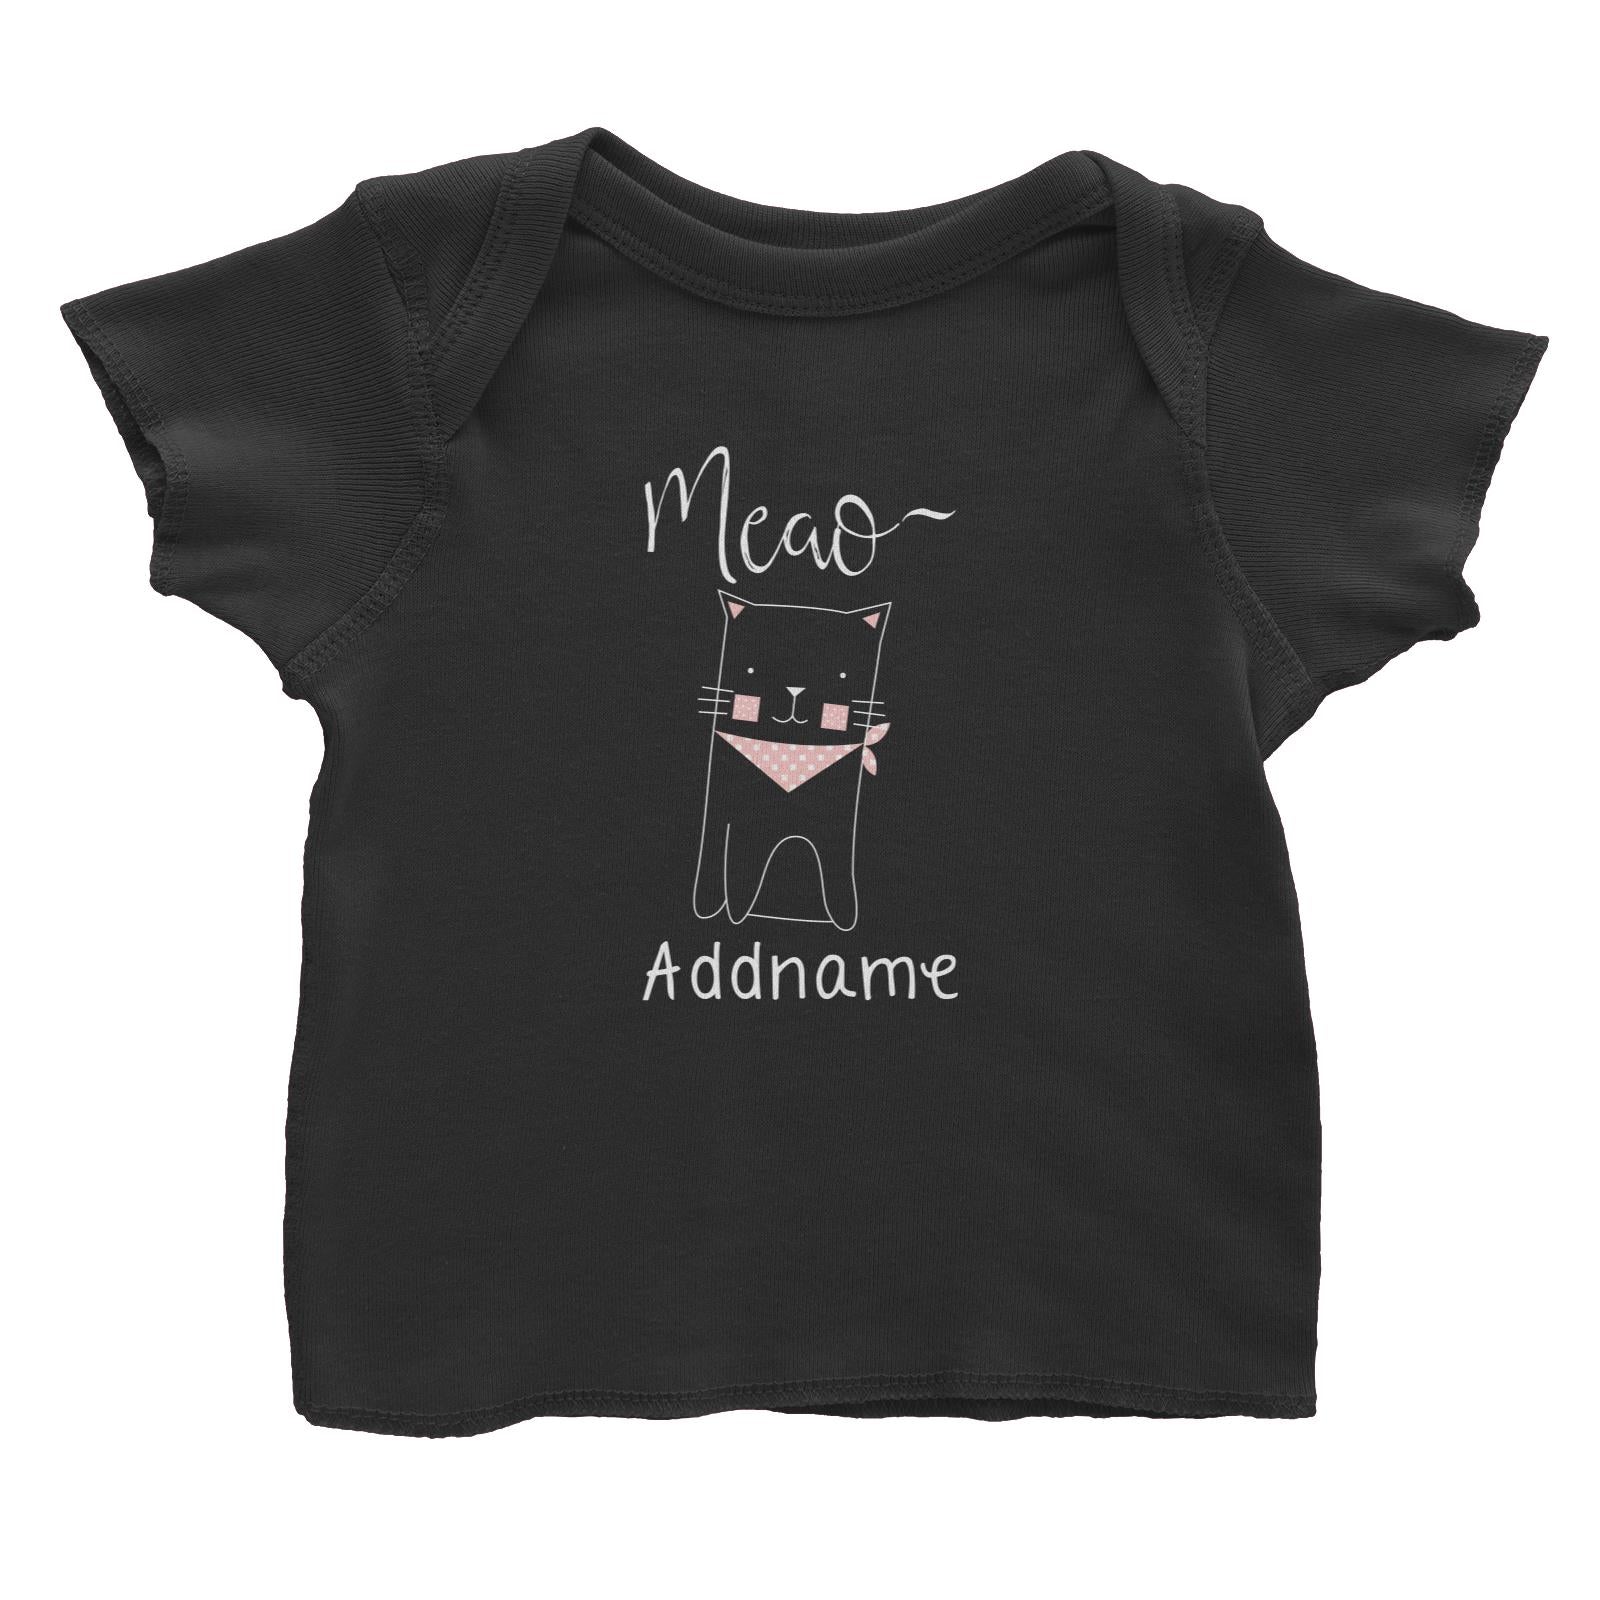 Cute Animals and Friends Series 2 Cat Meow Addname Baby T-Shirt